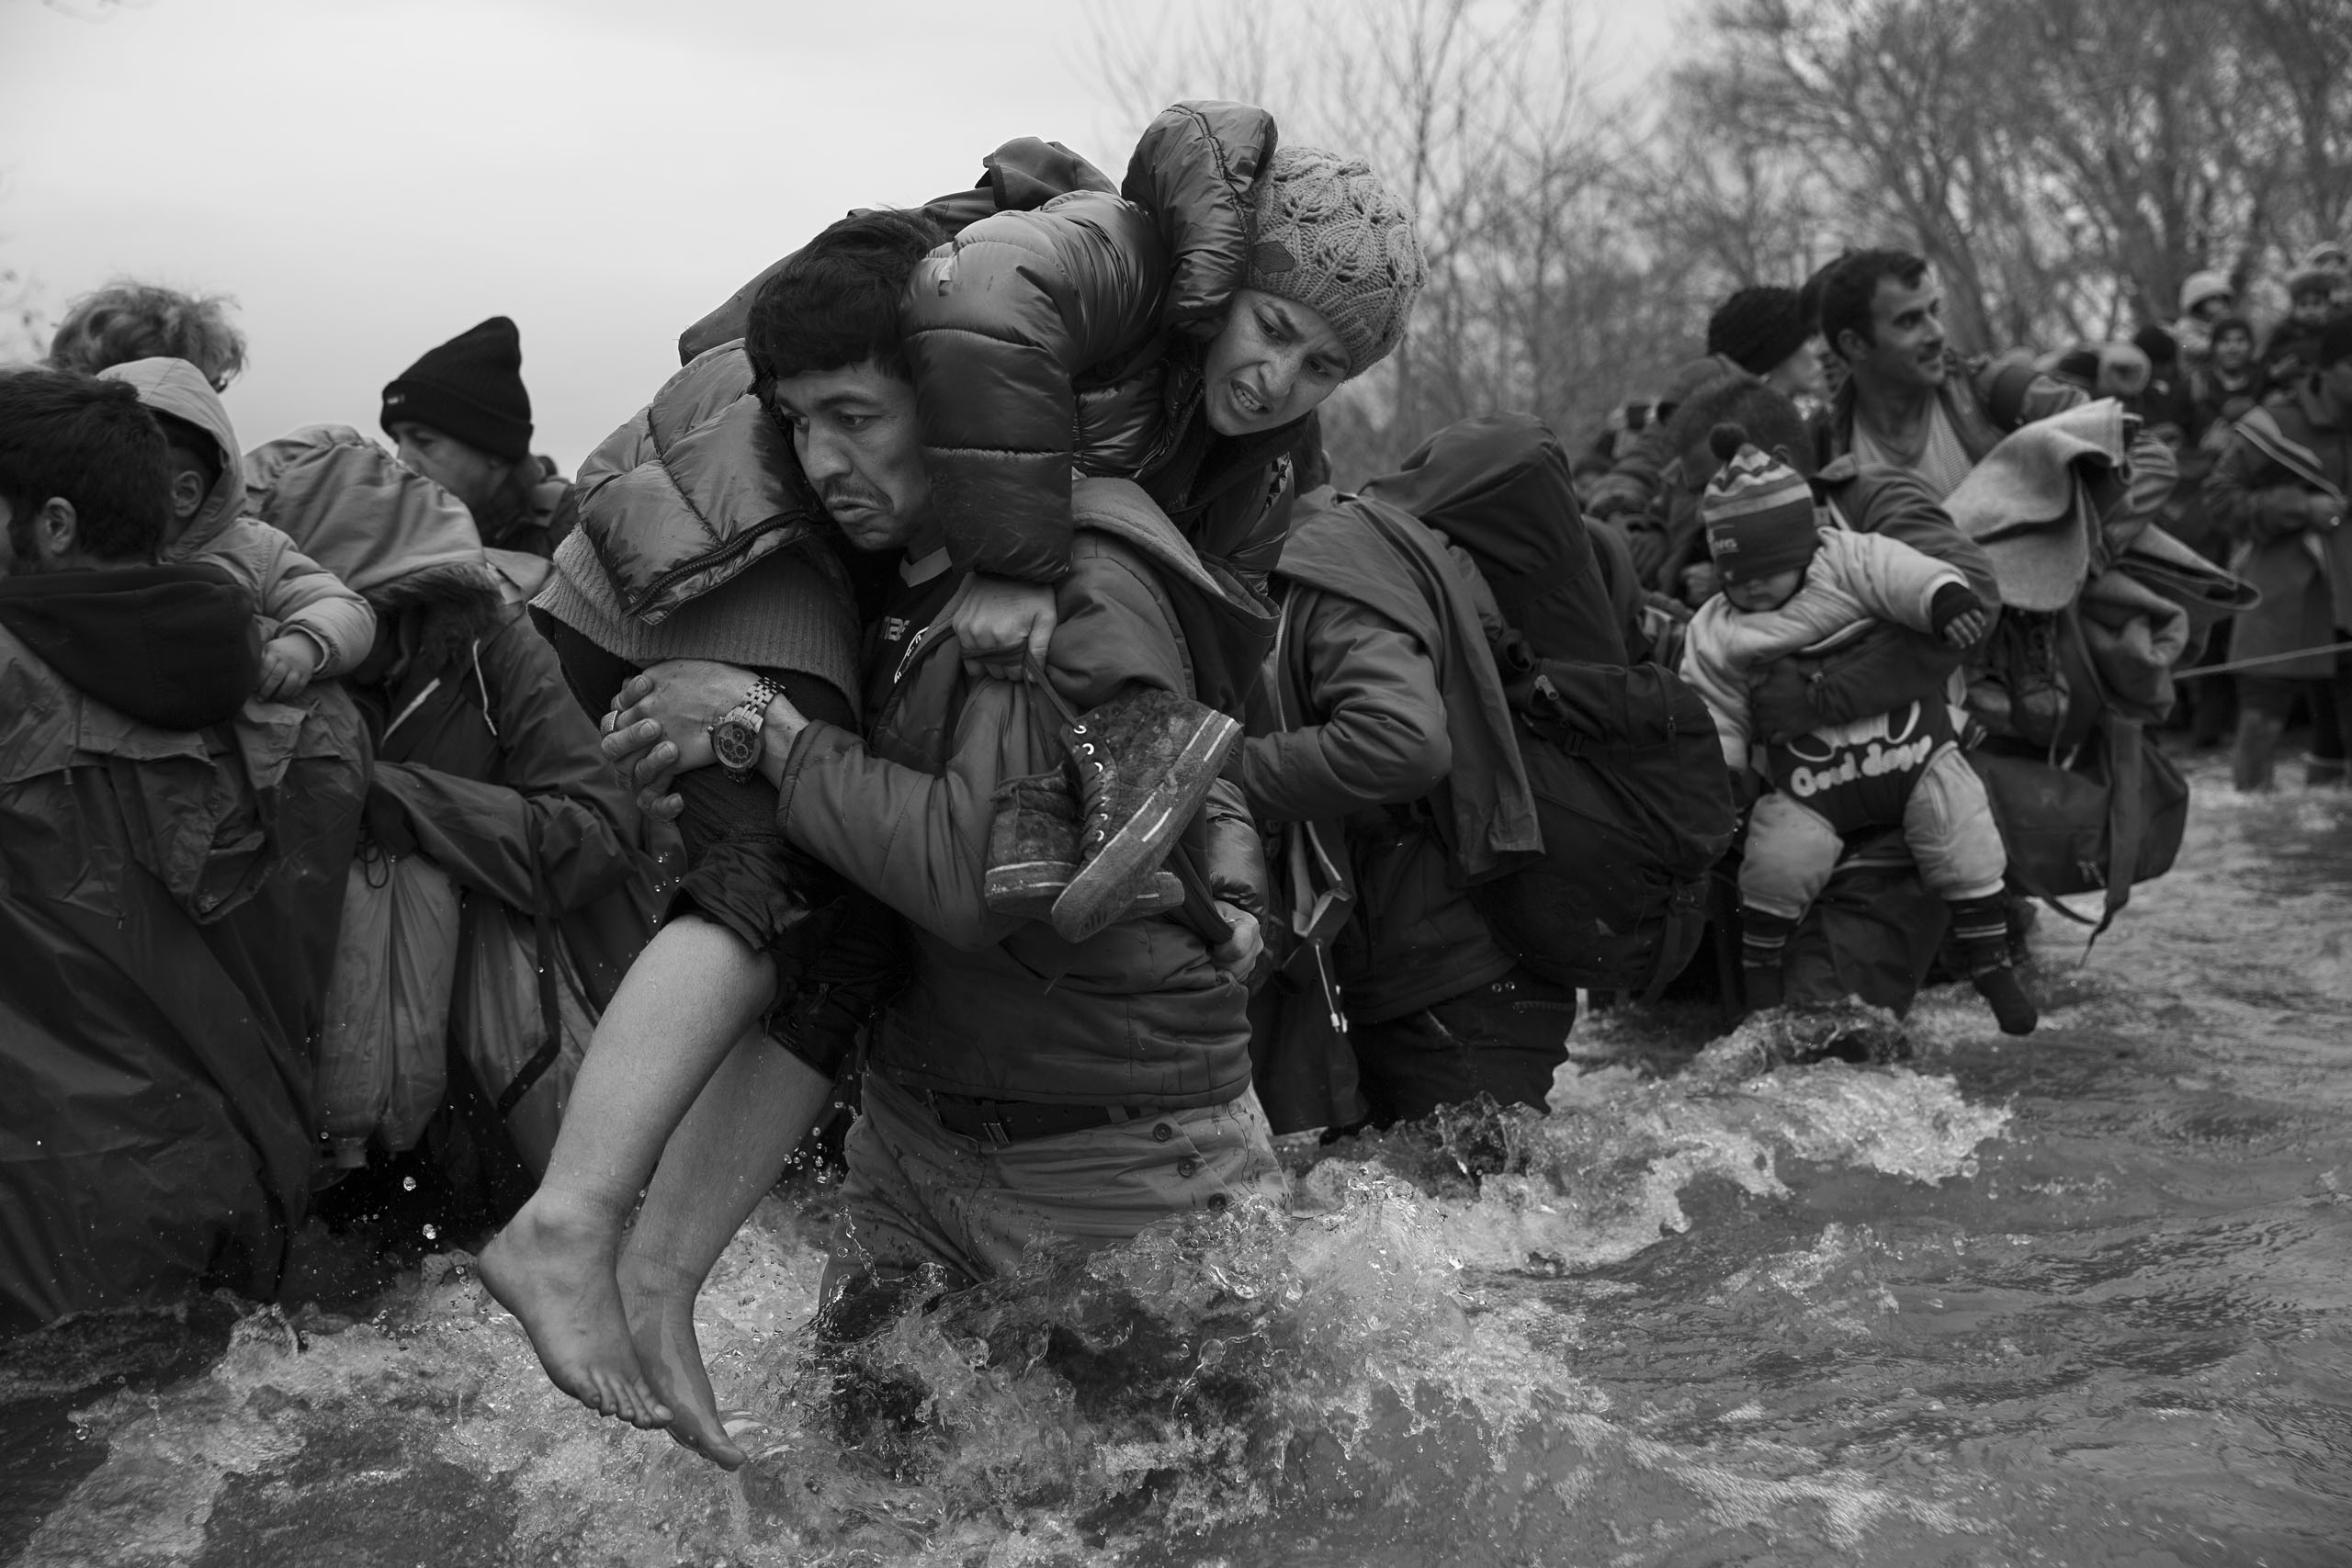 An estimated 1,000 migrants made their way from the sprawling camp in Idomeni, Greece and crossed a river near the border in the hopes of crossing into Macedonia, March 14, 2016.